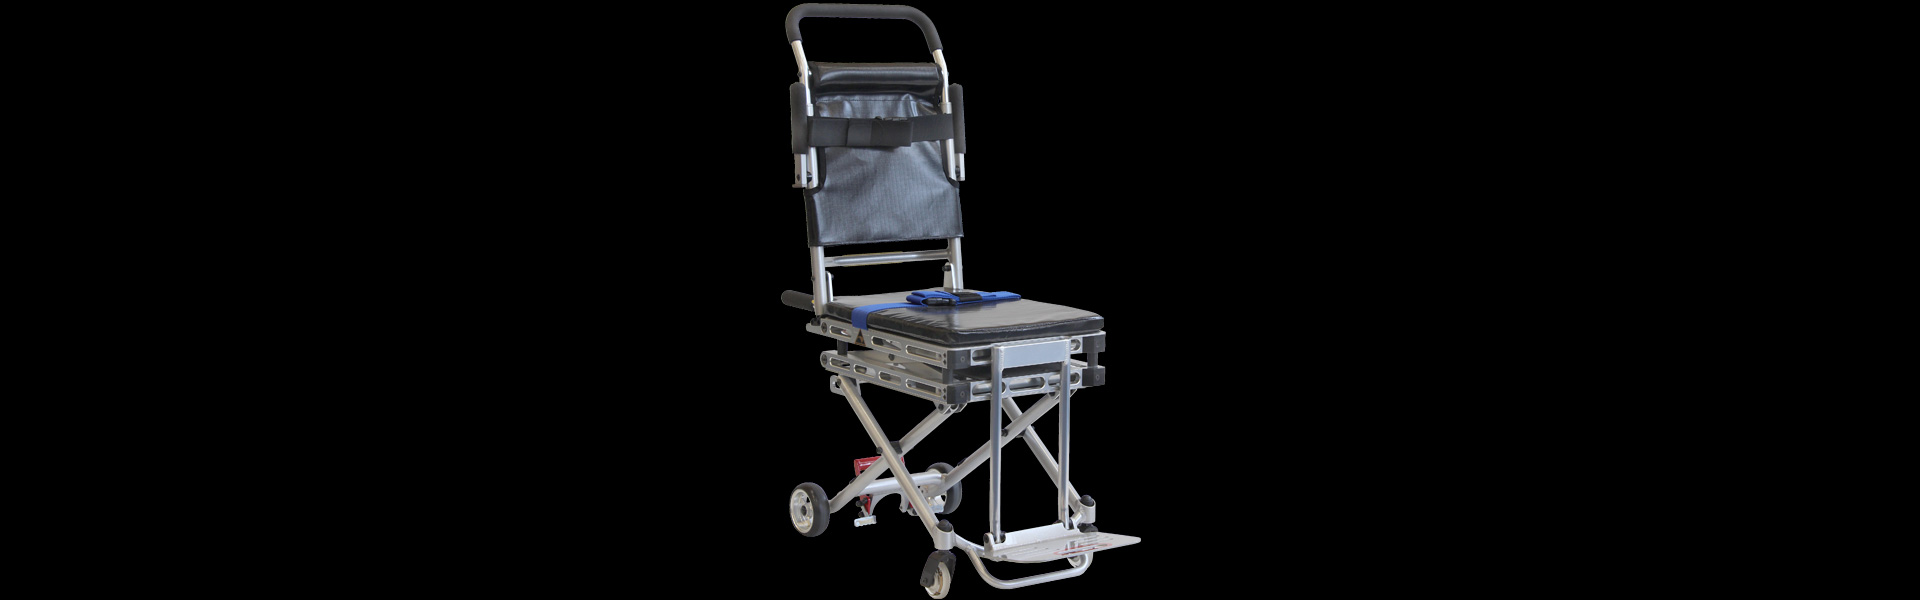 Aisle Onboard Lift Chair